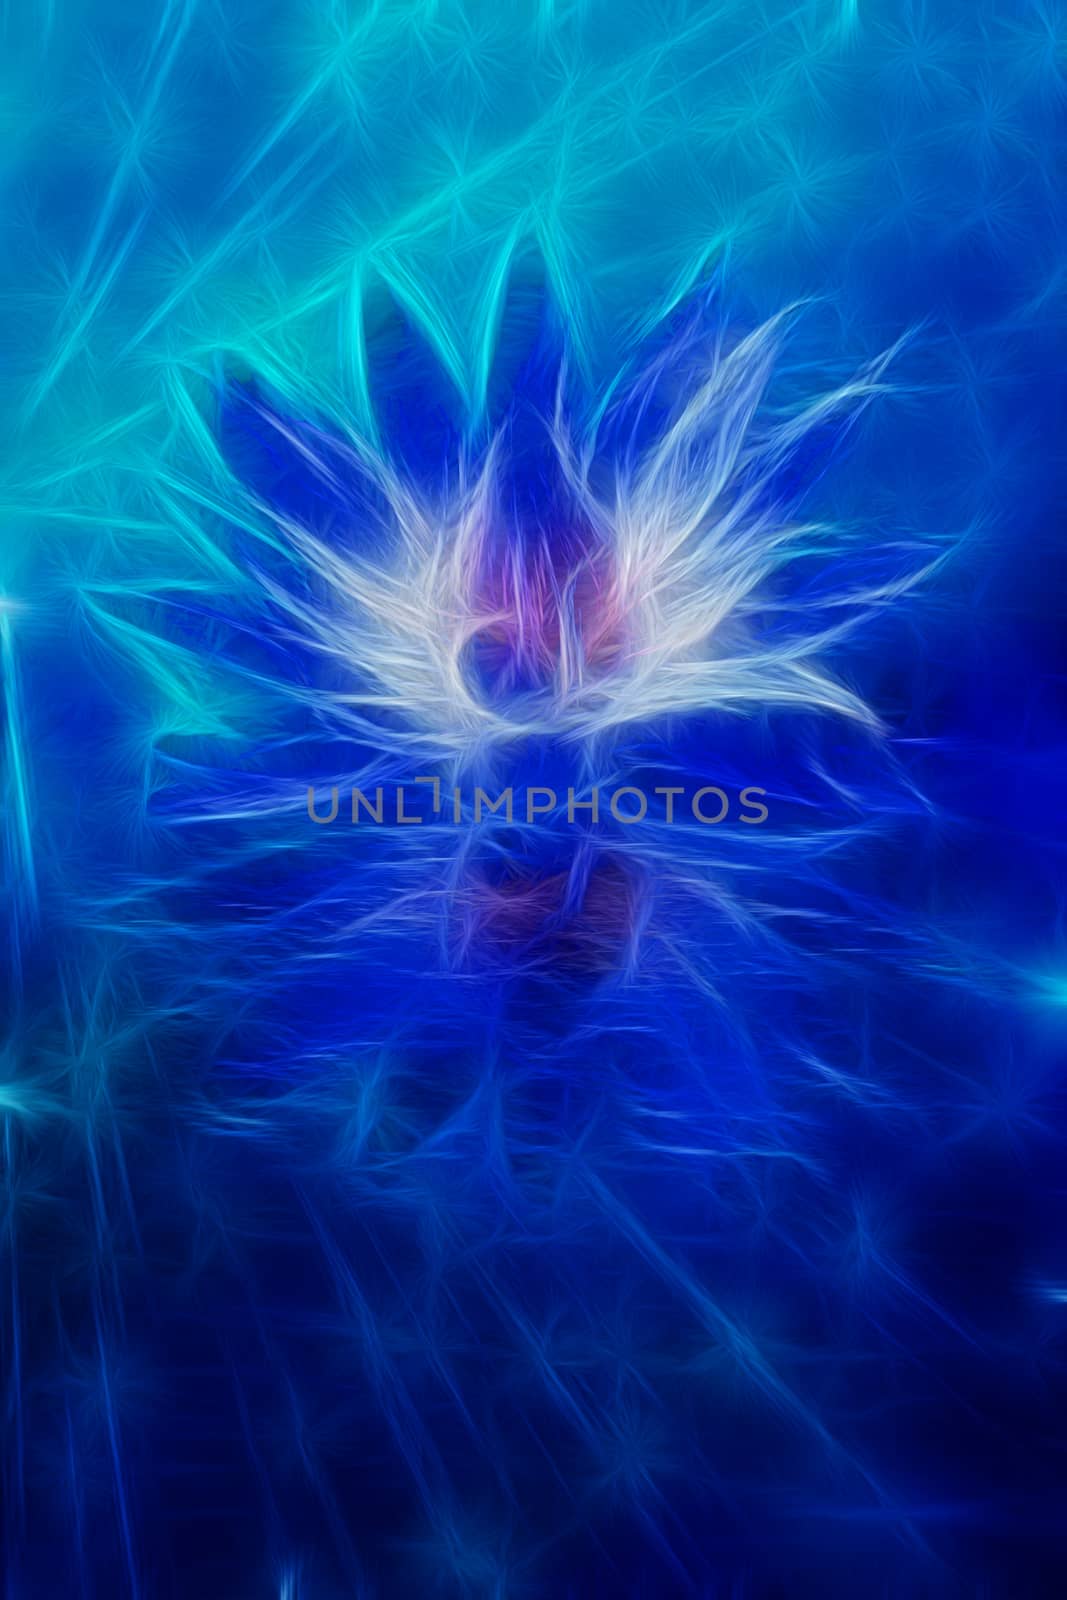 Beautiful Lotus Flower Abstraction by applesstock